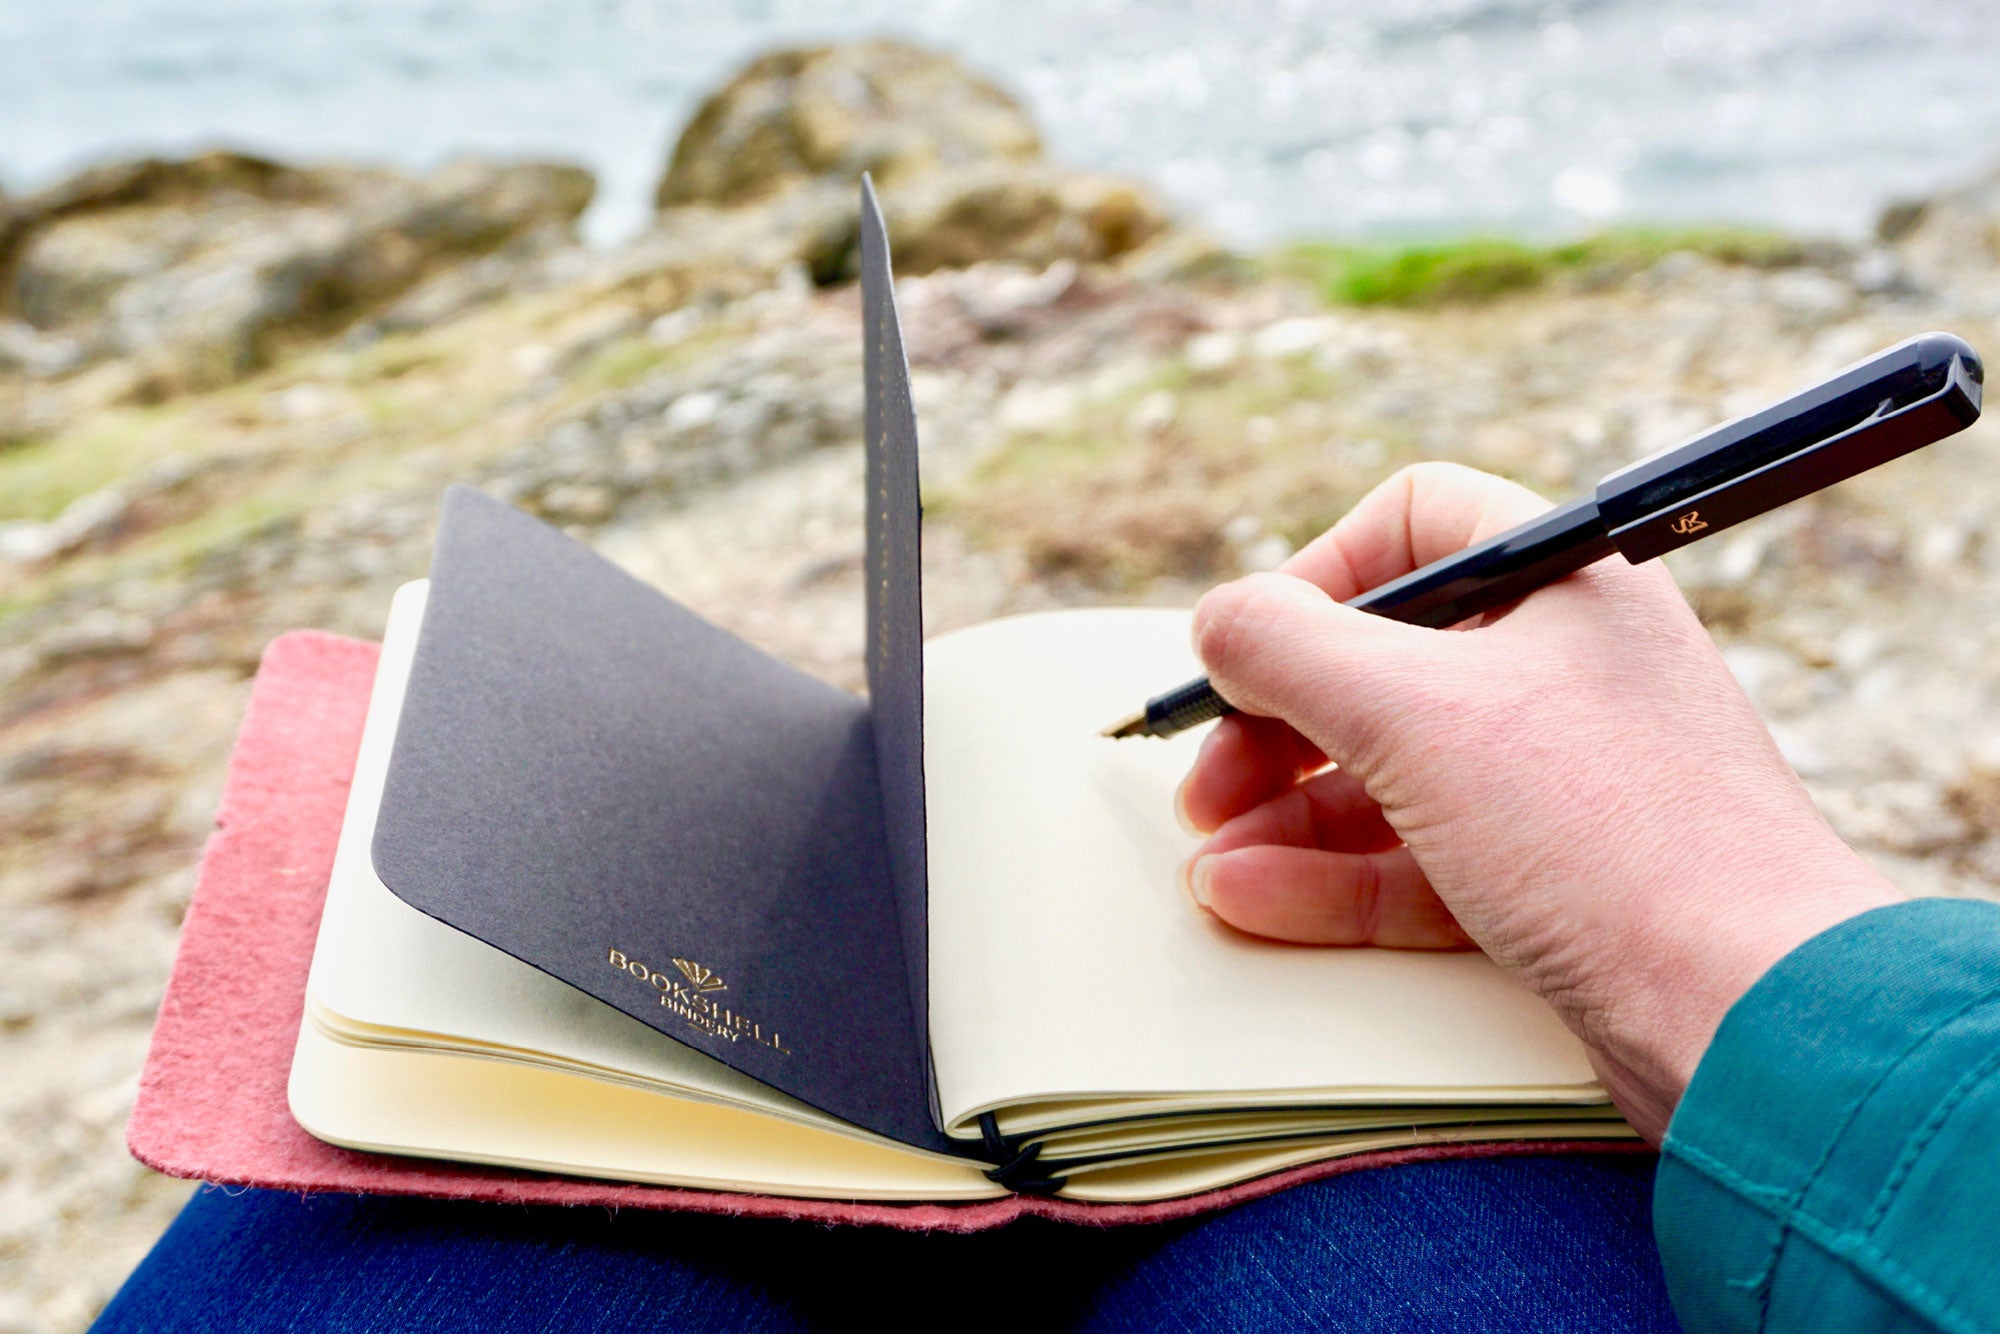 Pink Vegan Leather Journal made from Pinatex Pineapple leather from Bookshell Bindery photographed in use on the beach